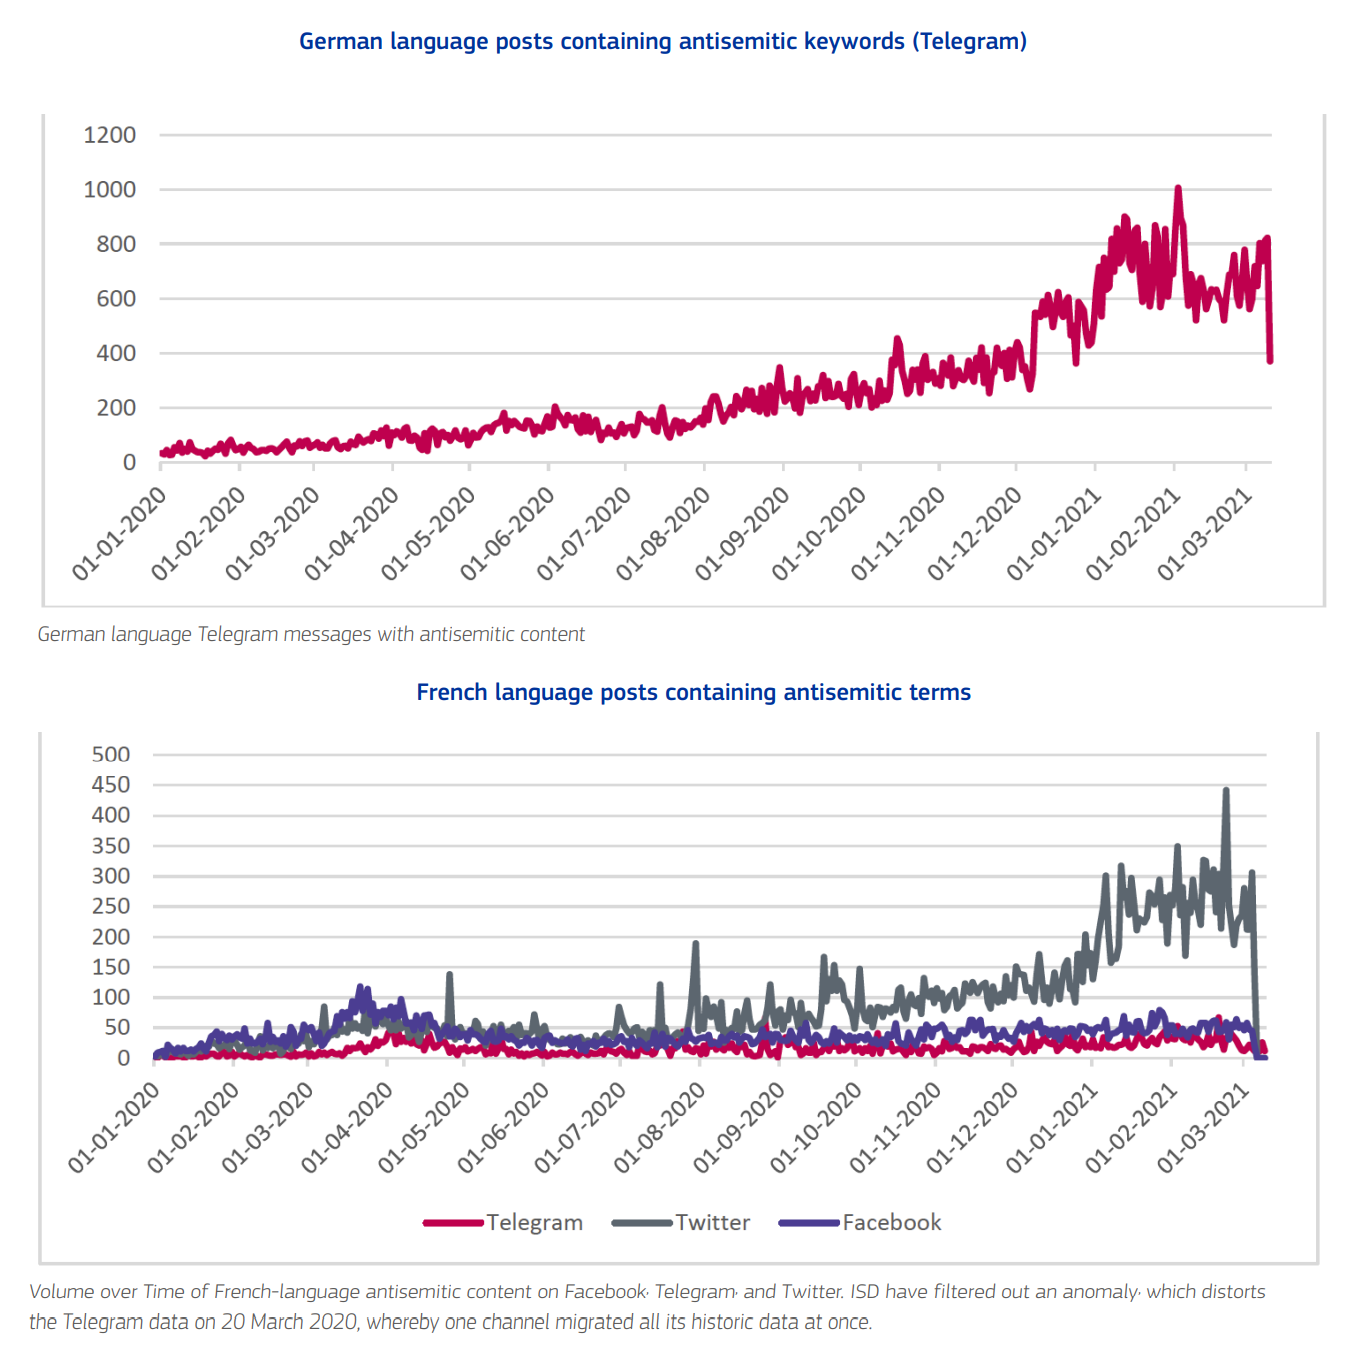 German language posts (top) and French language posts (bottom) containing antisemitic content, 1 January 2020 - 8 March 2021. German language posts are shown only for Telegram, because the numbers of antisemitic posts on Facebook and Twitter and were low and constant. In France, the huge increase in antisemitic posts during the pandemic occurred almost entirely on Twitter. Graphic: EU